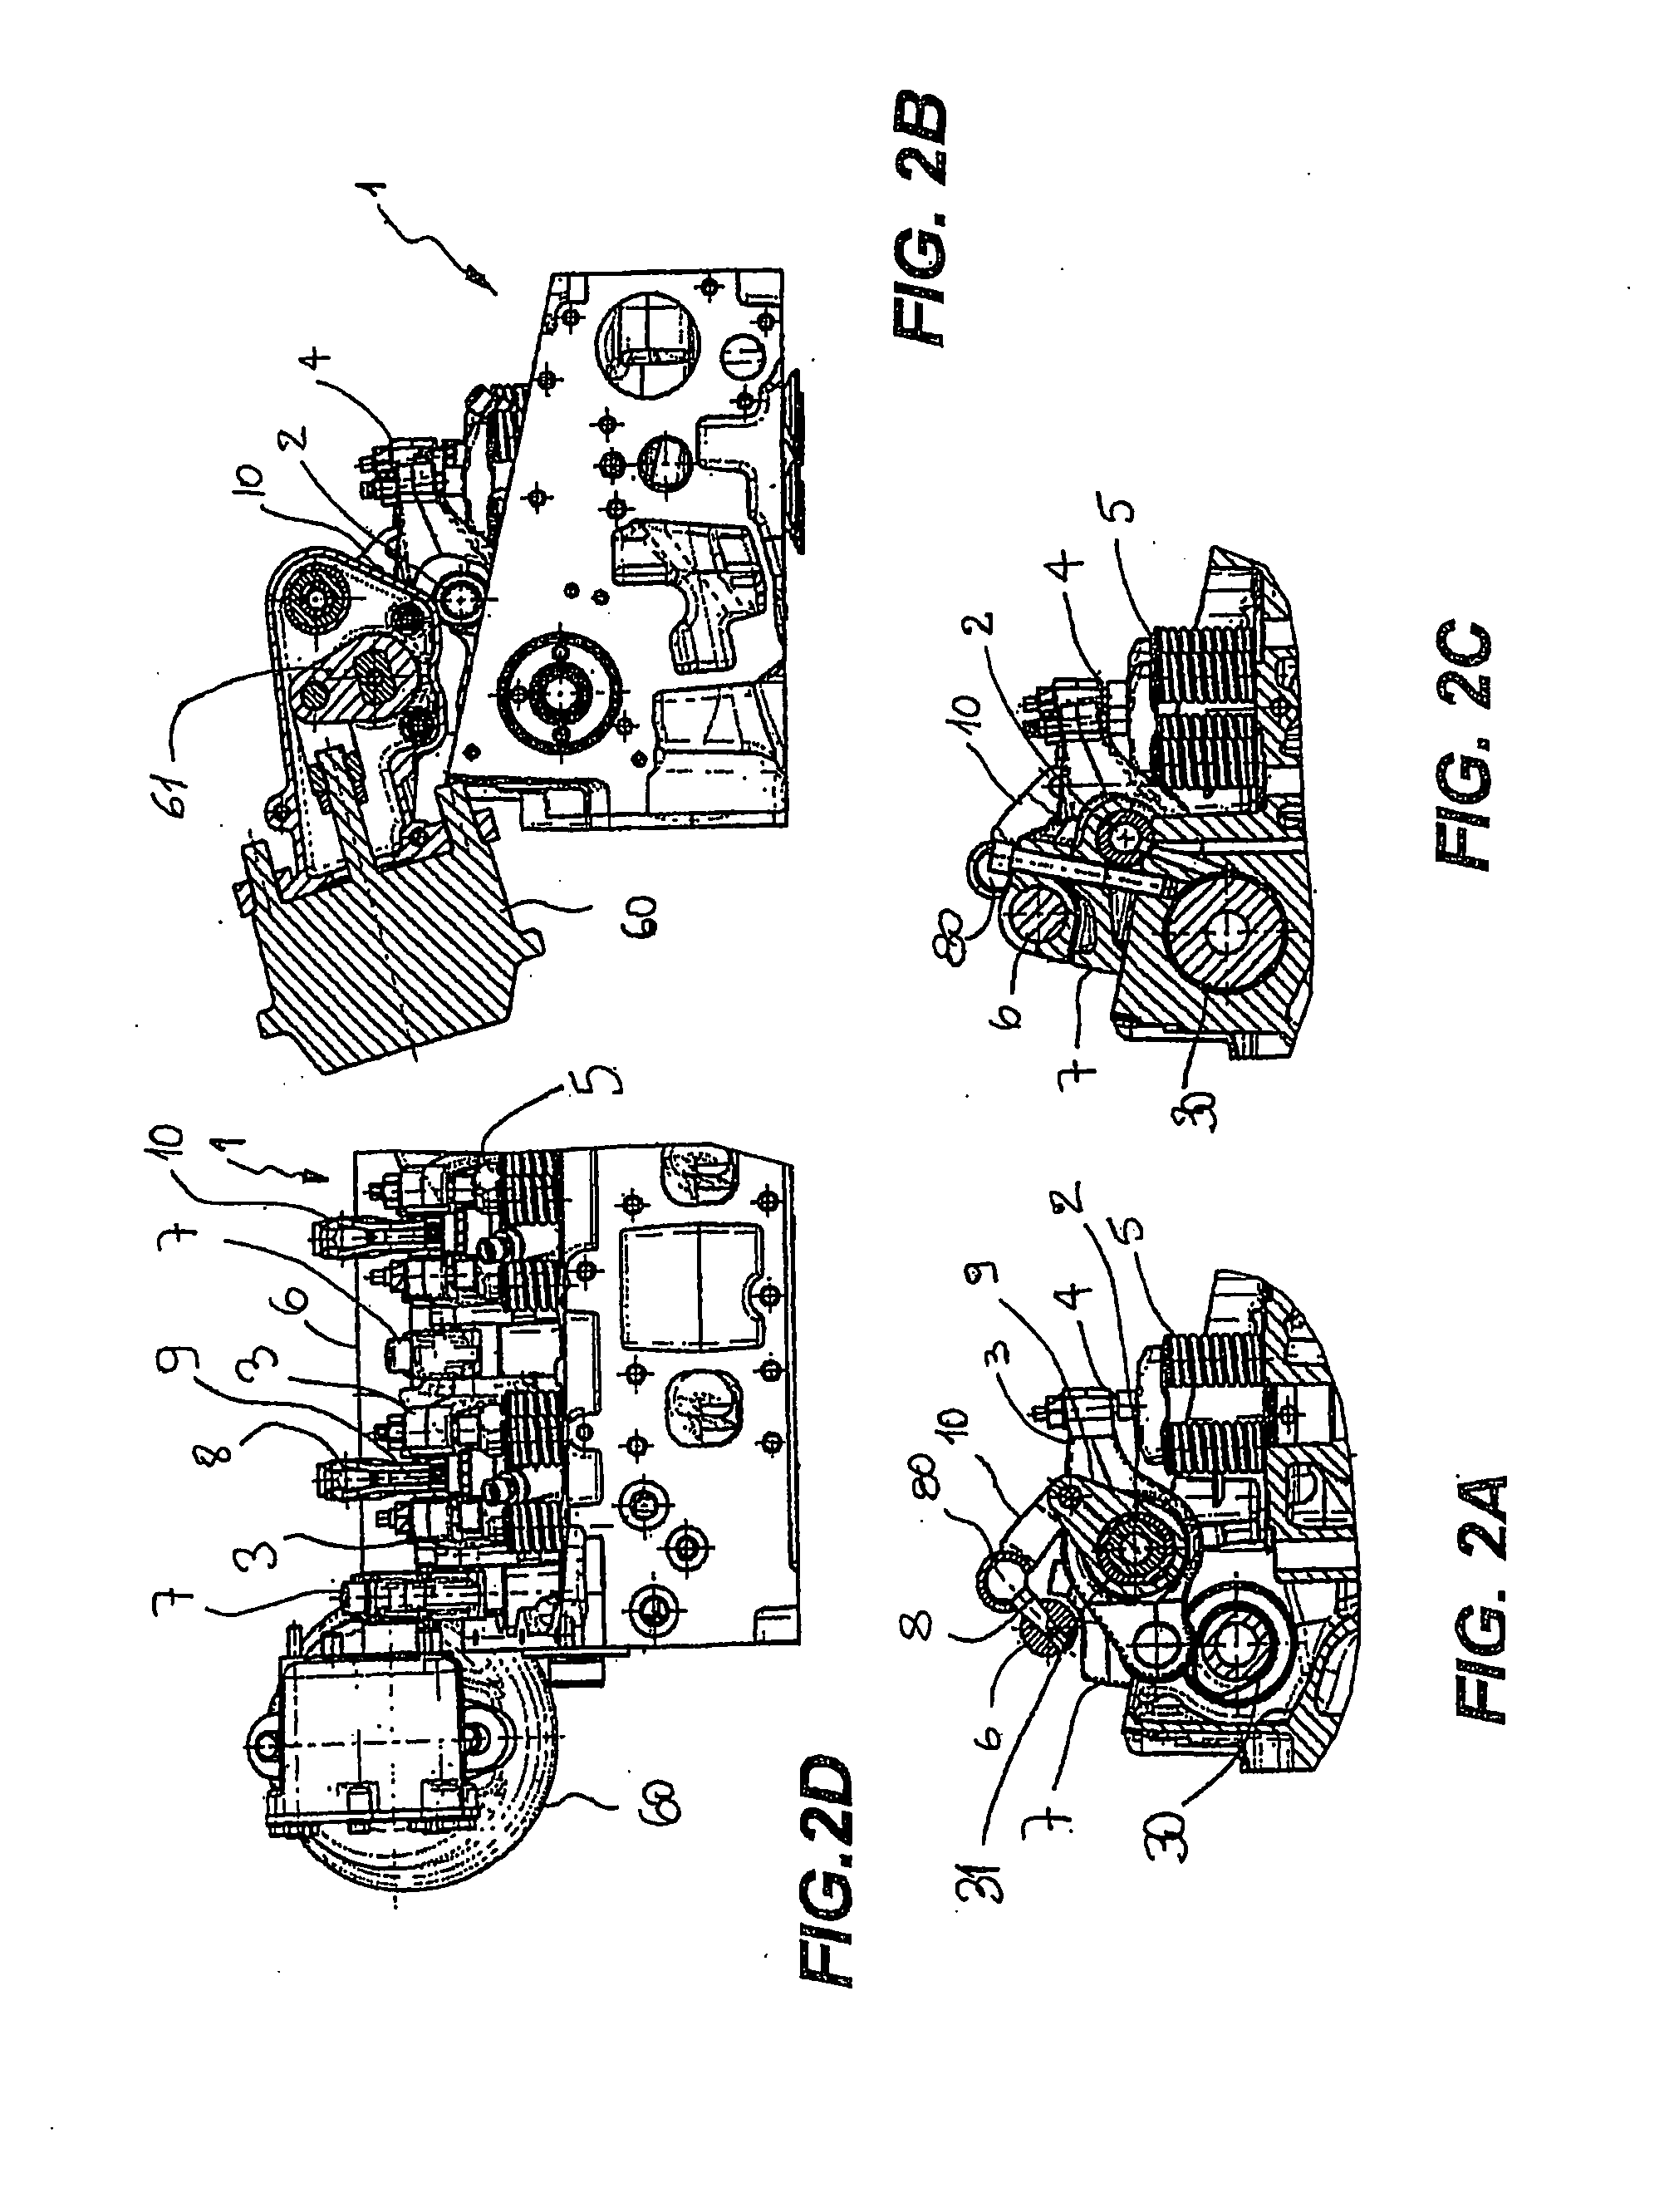 Decompression braking device in endothermic engines